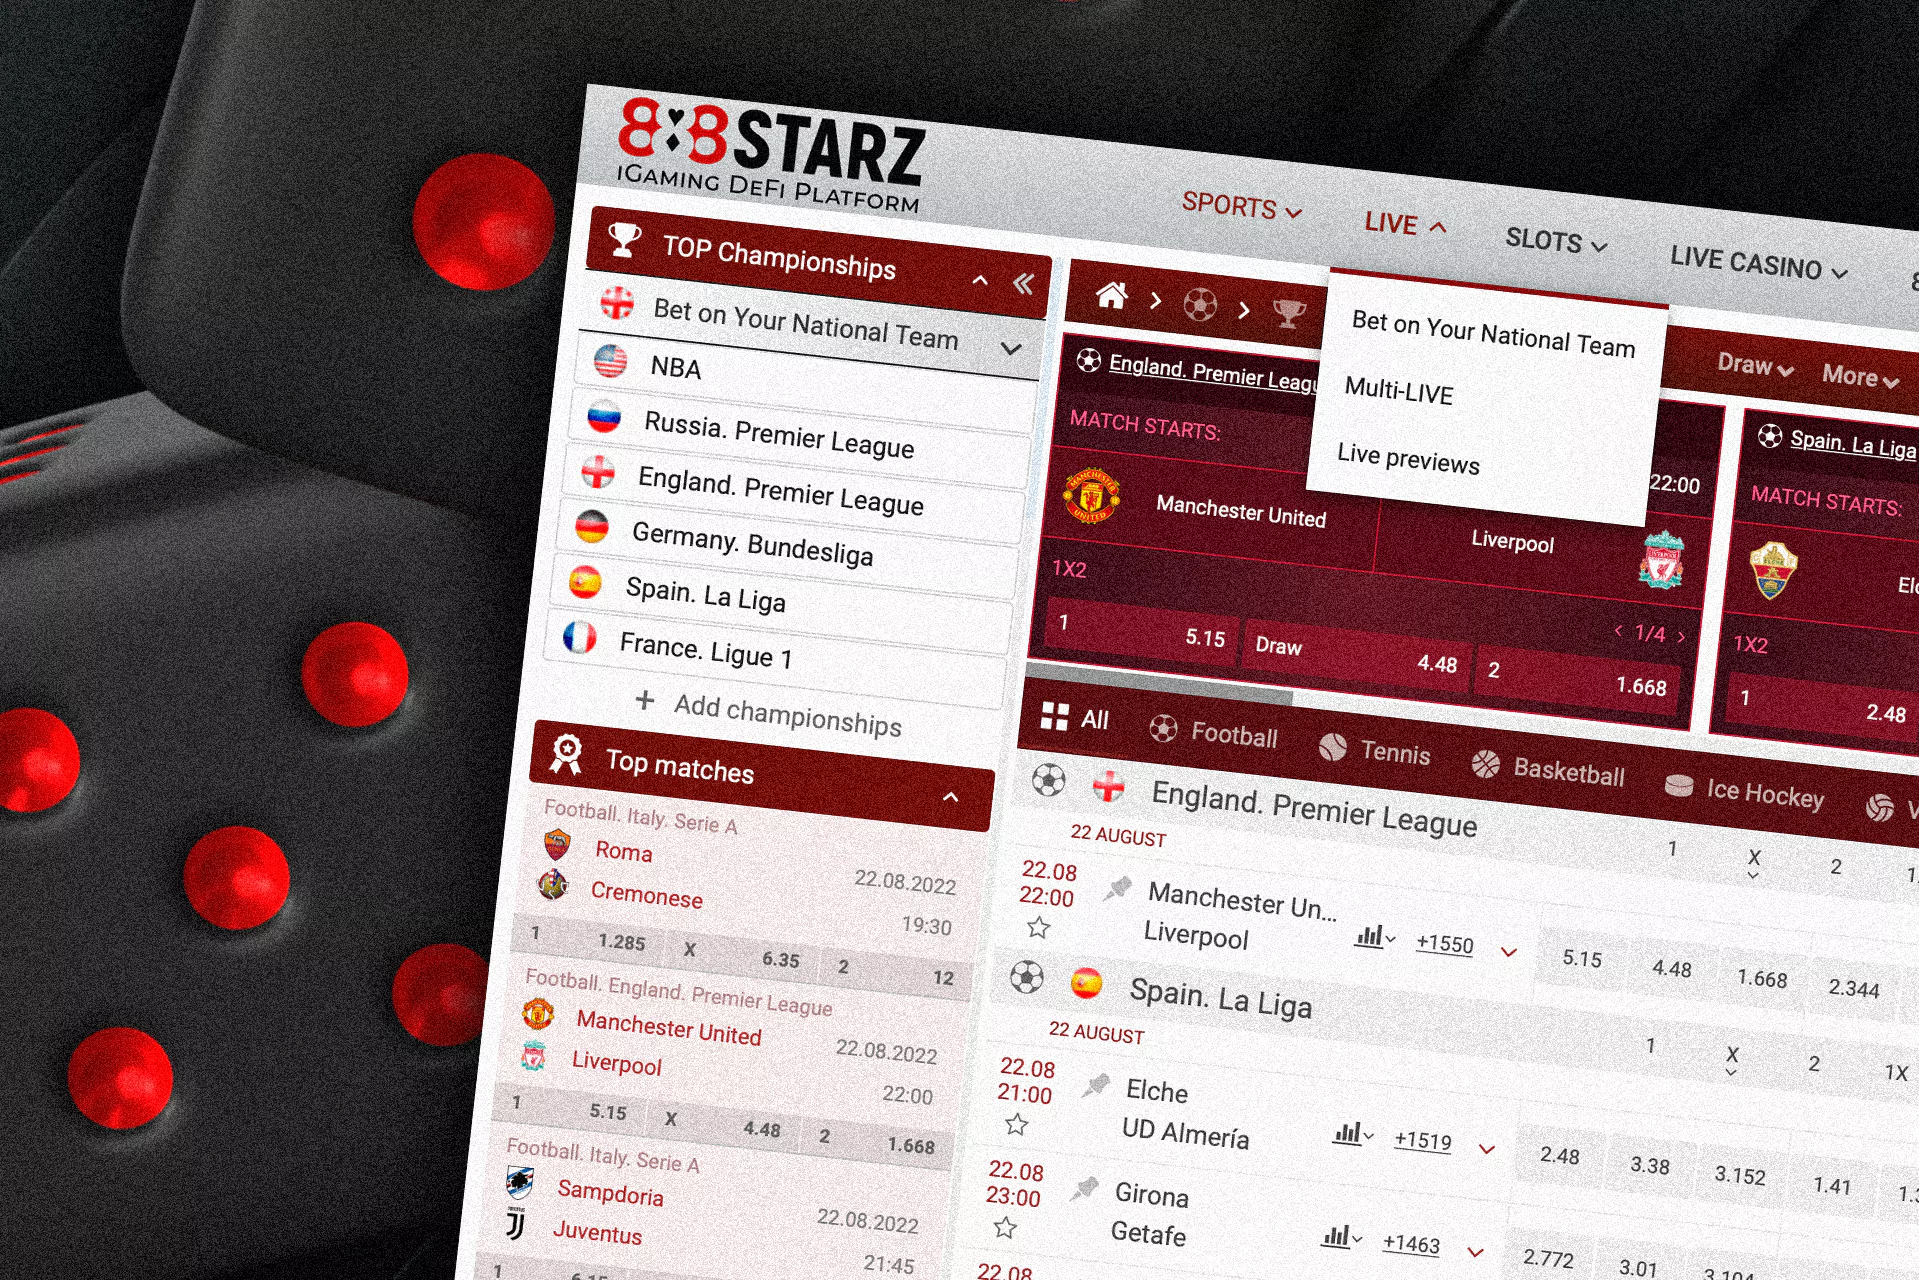 There are lots of betting options available for users of 888starz.